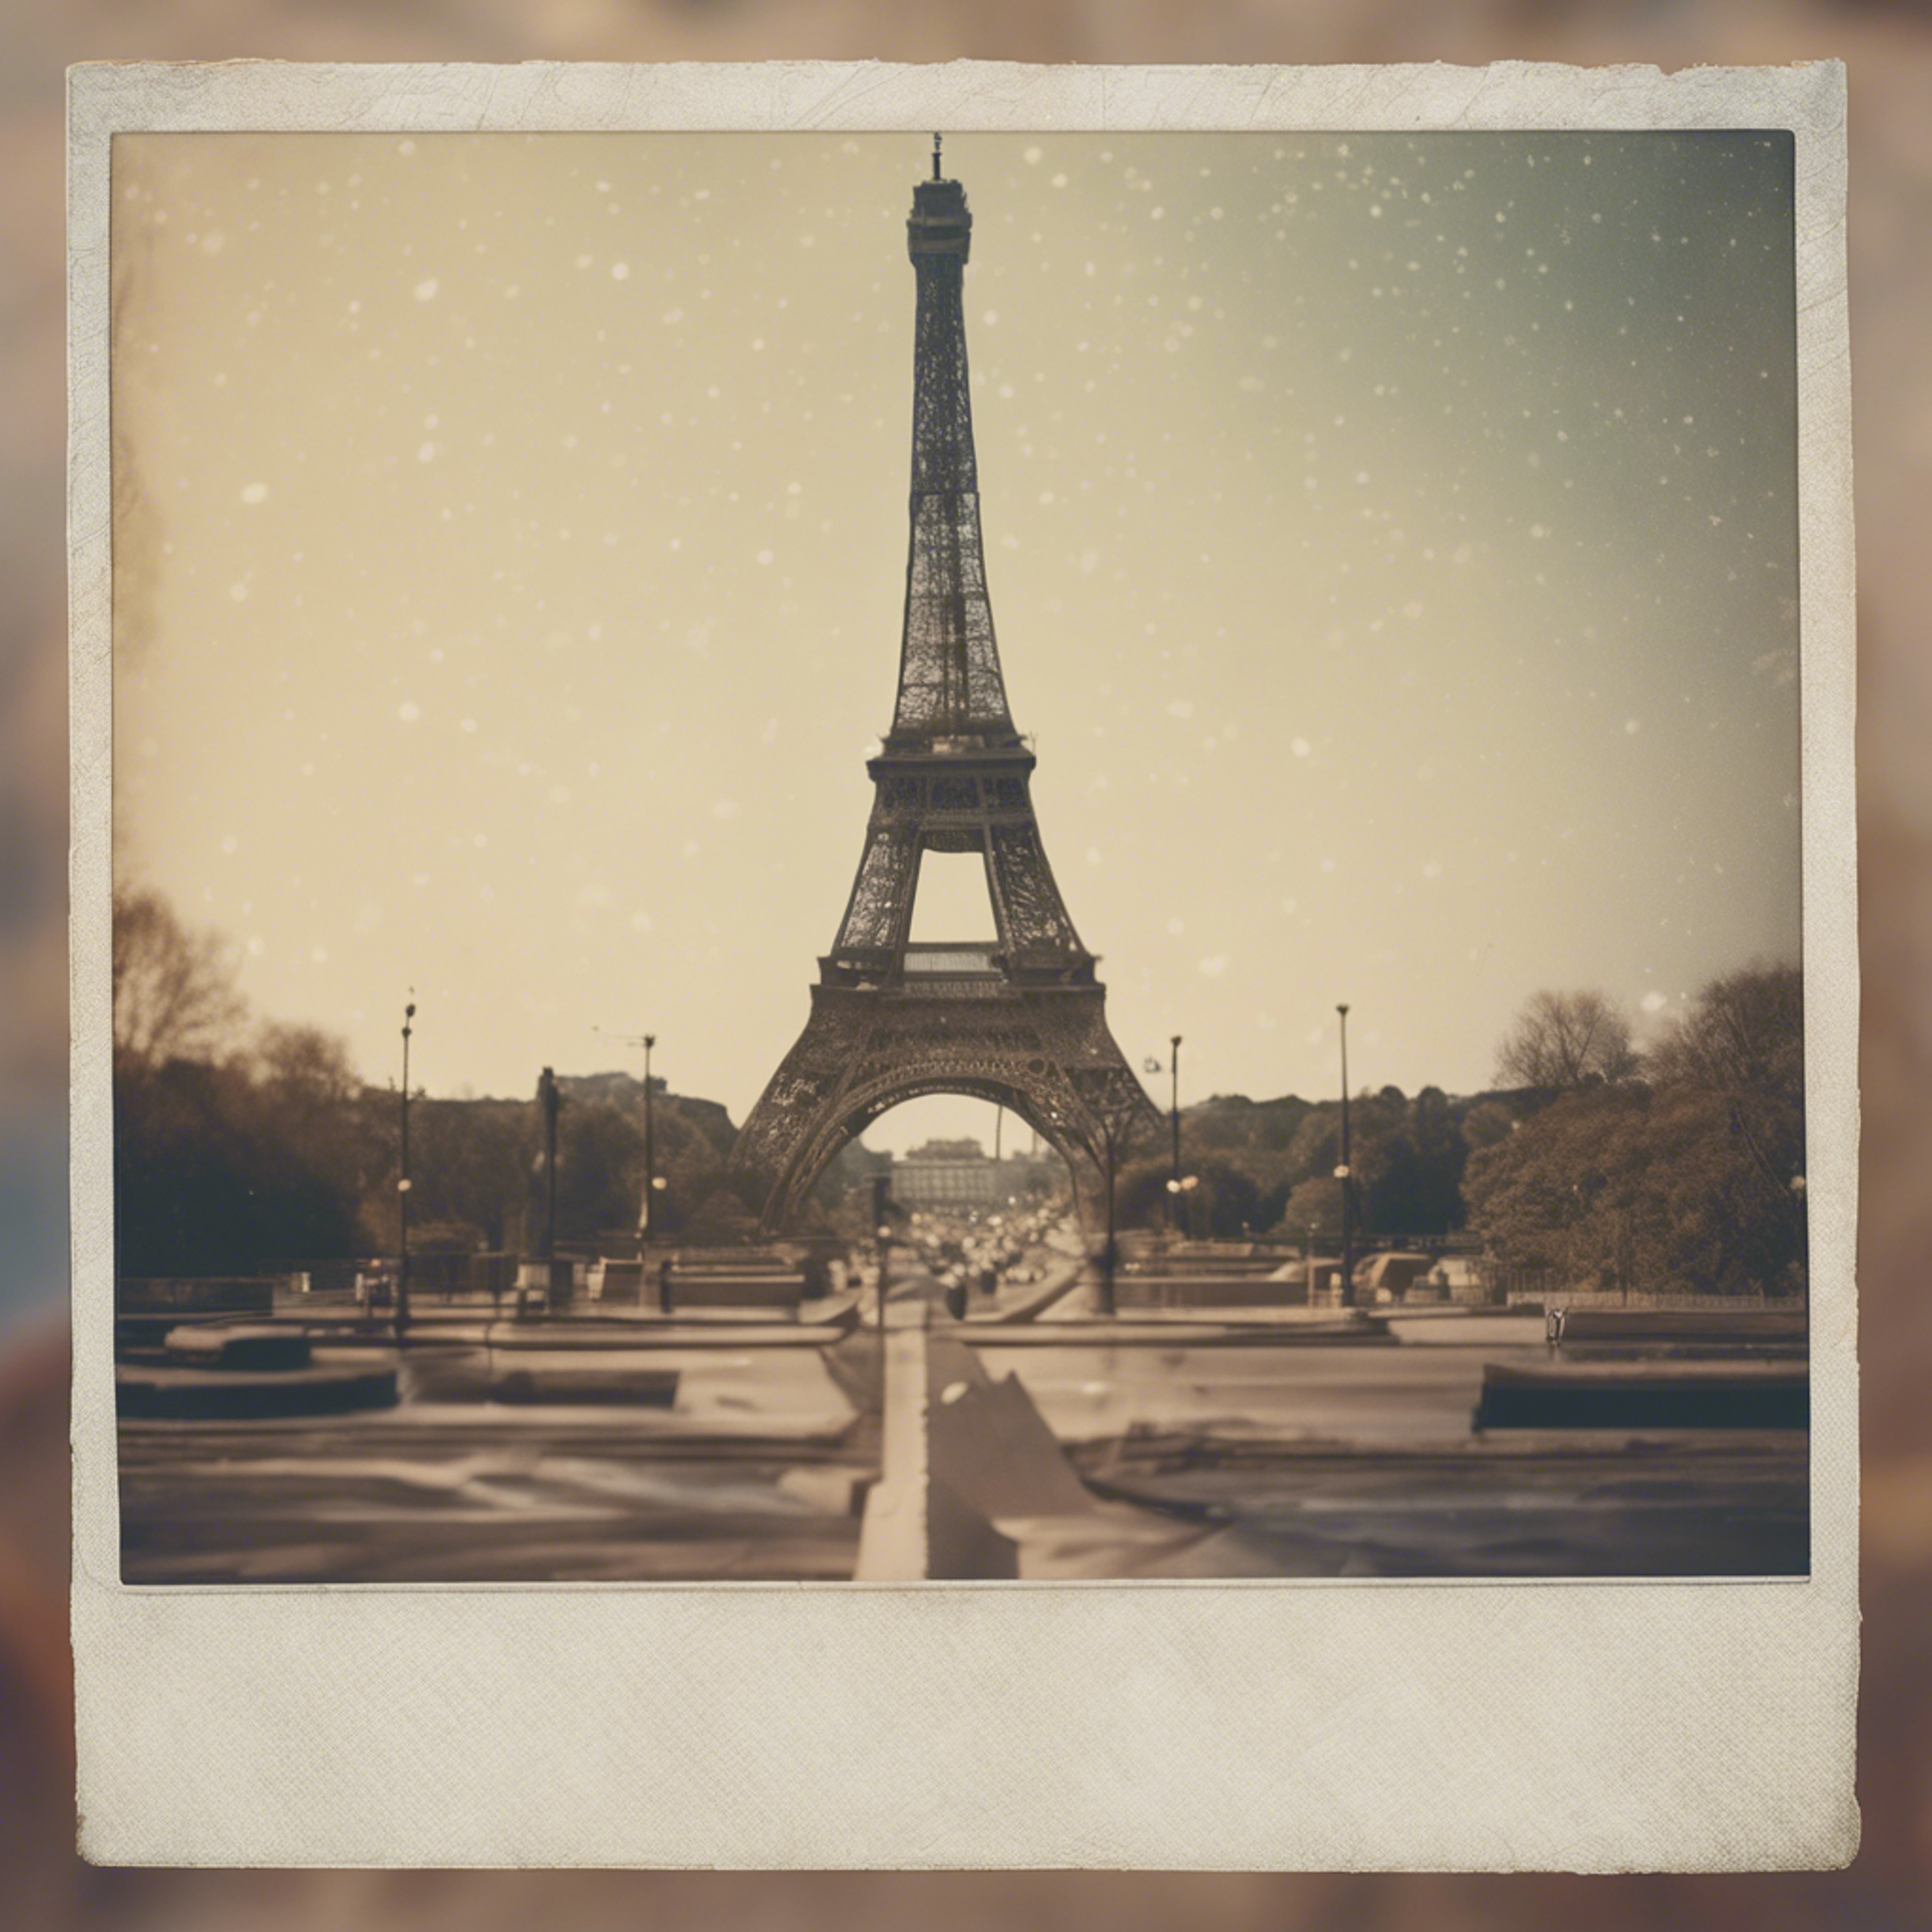 A faded beige Polaroid picture of an iconic landmark from the 70s. Tapeet[3ceb93f71d2c49b28cf4]